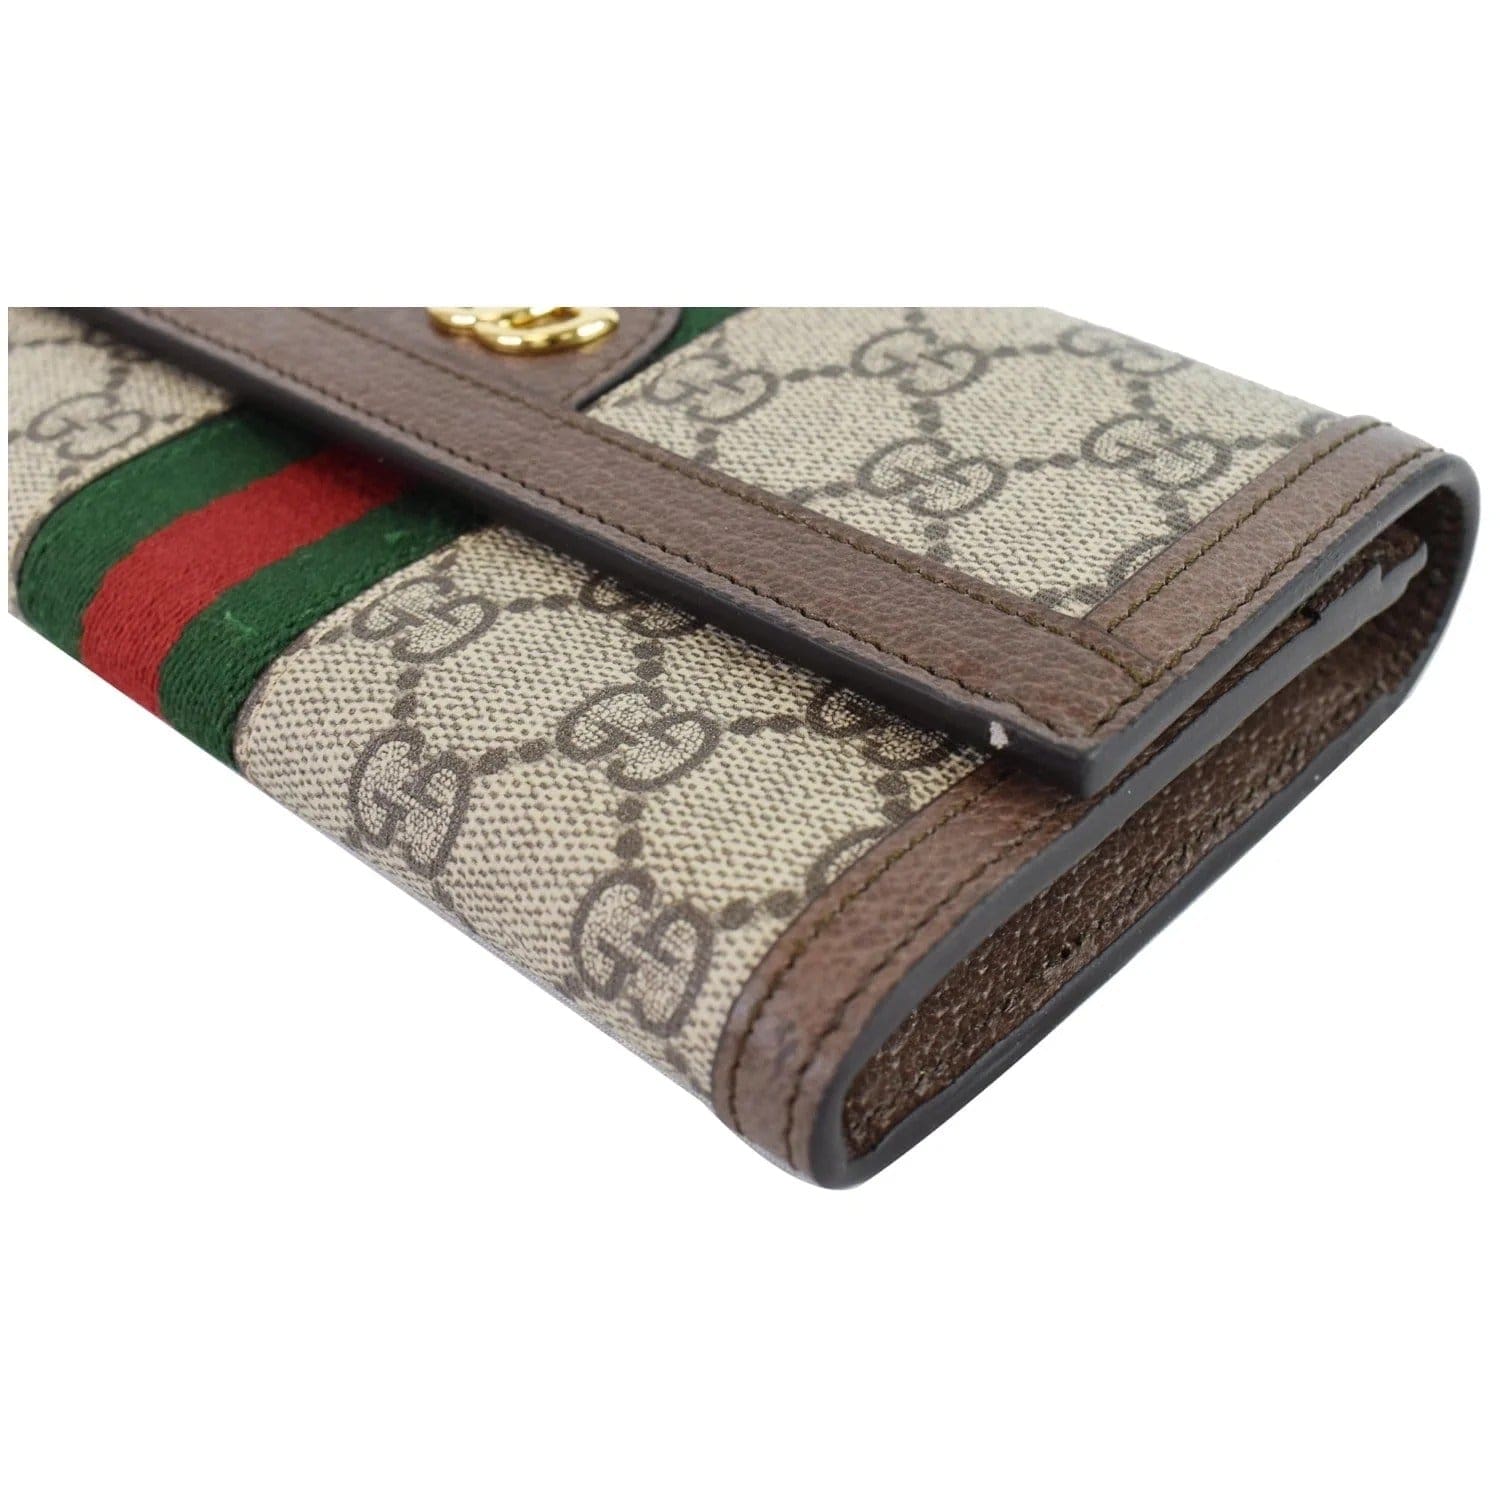 GUCCI Ophidia Trifold Wallet Brown/Beige 625703 PVC Leather